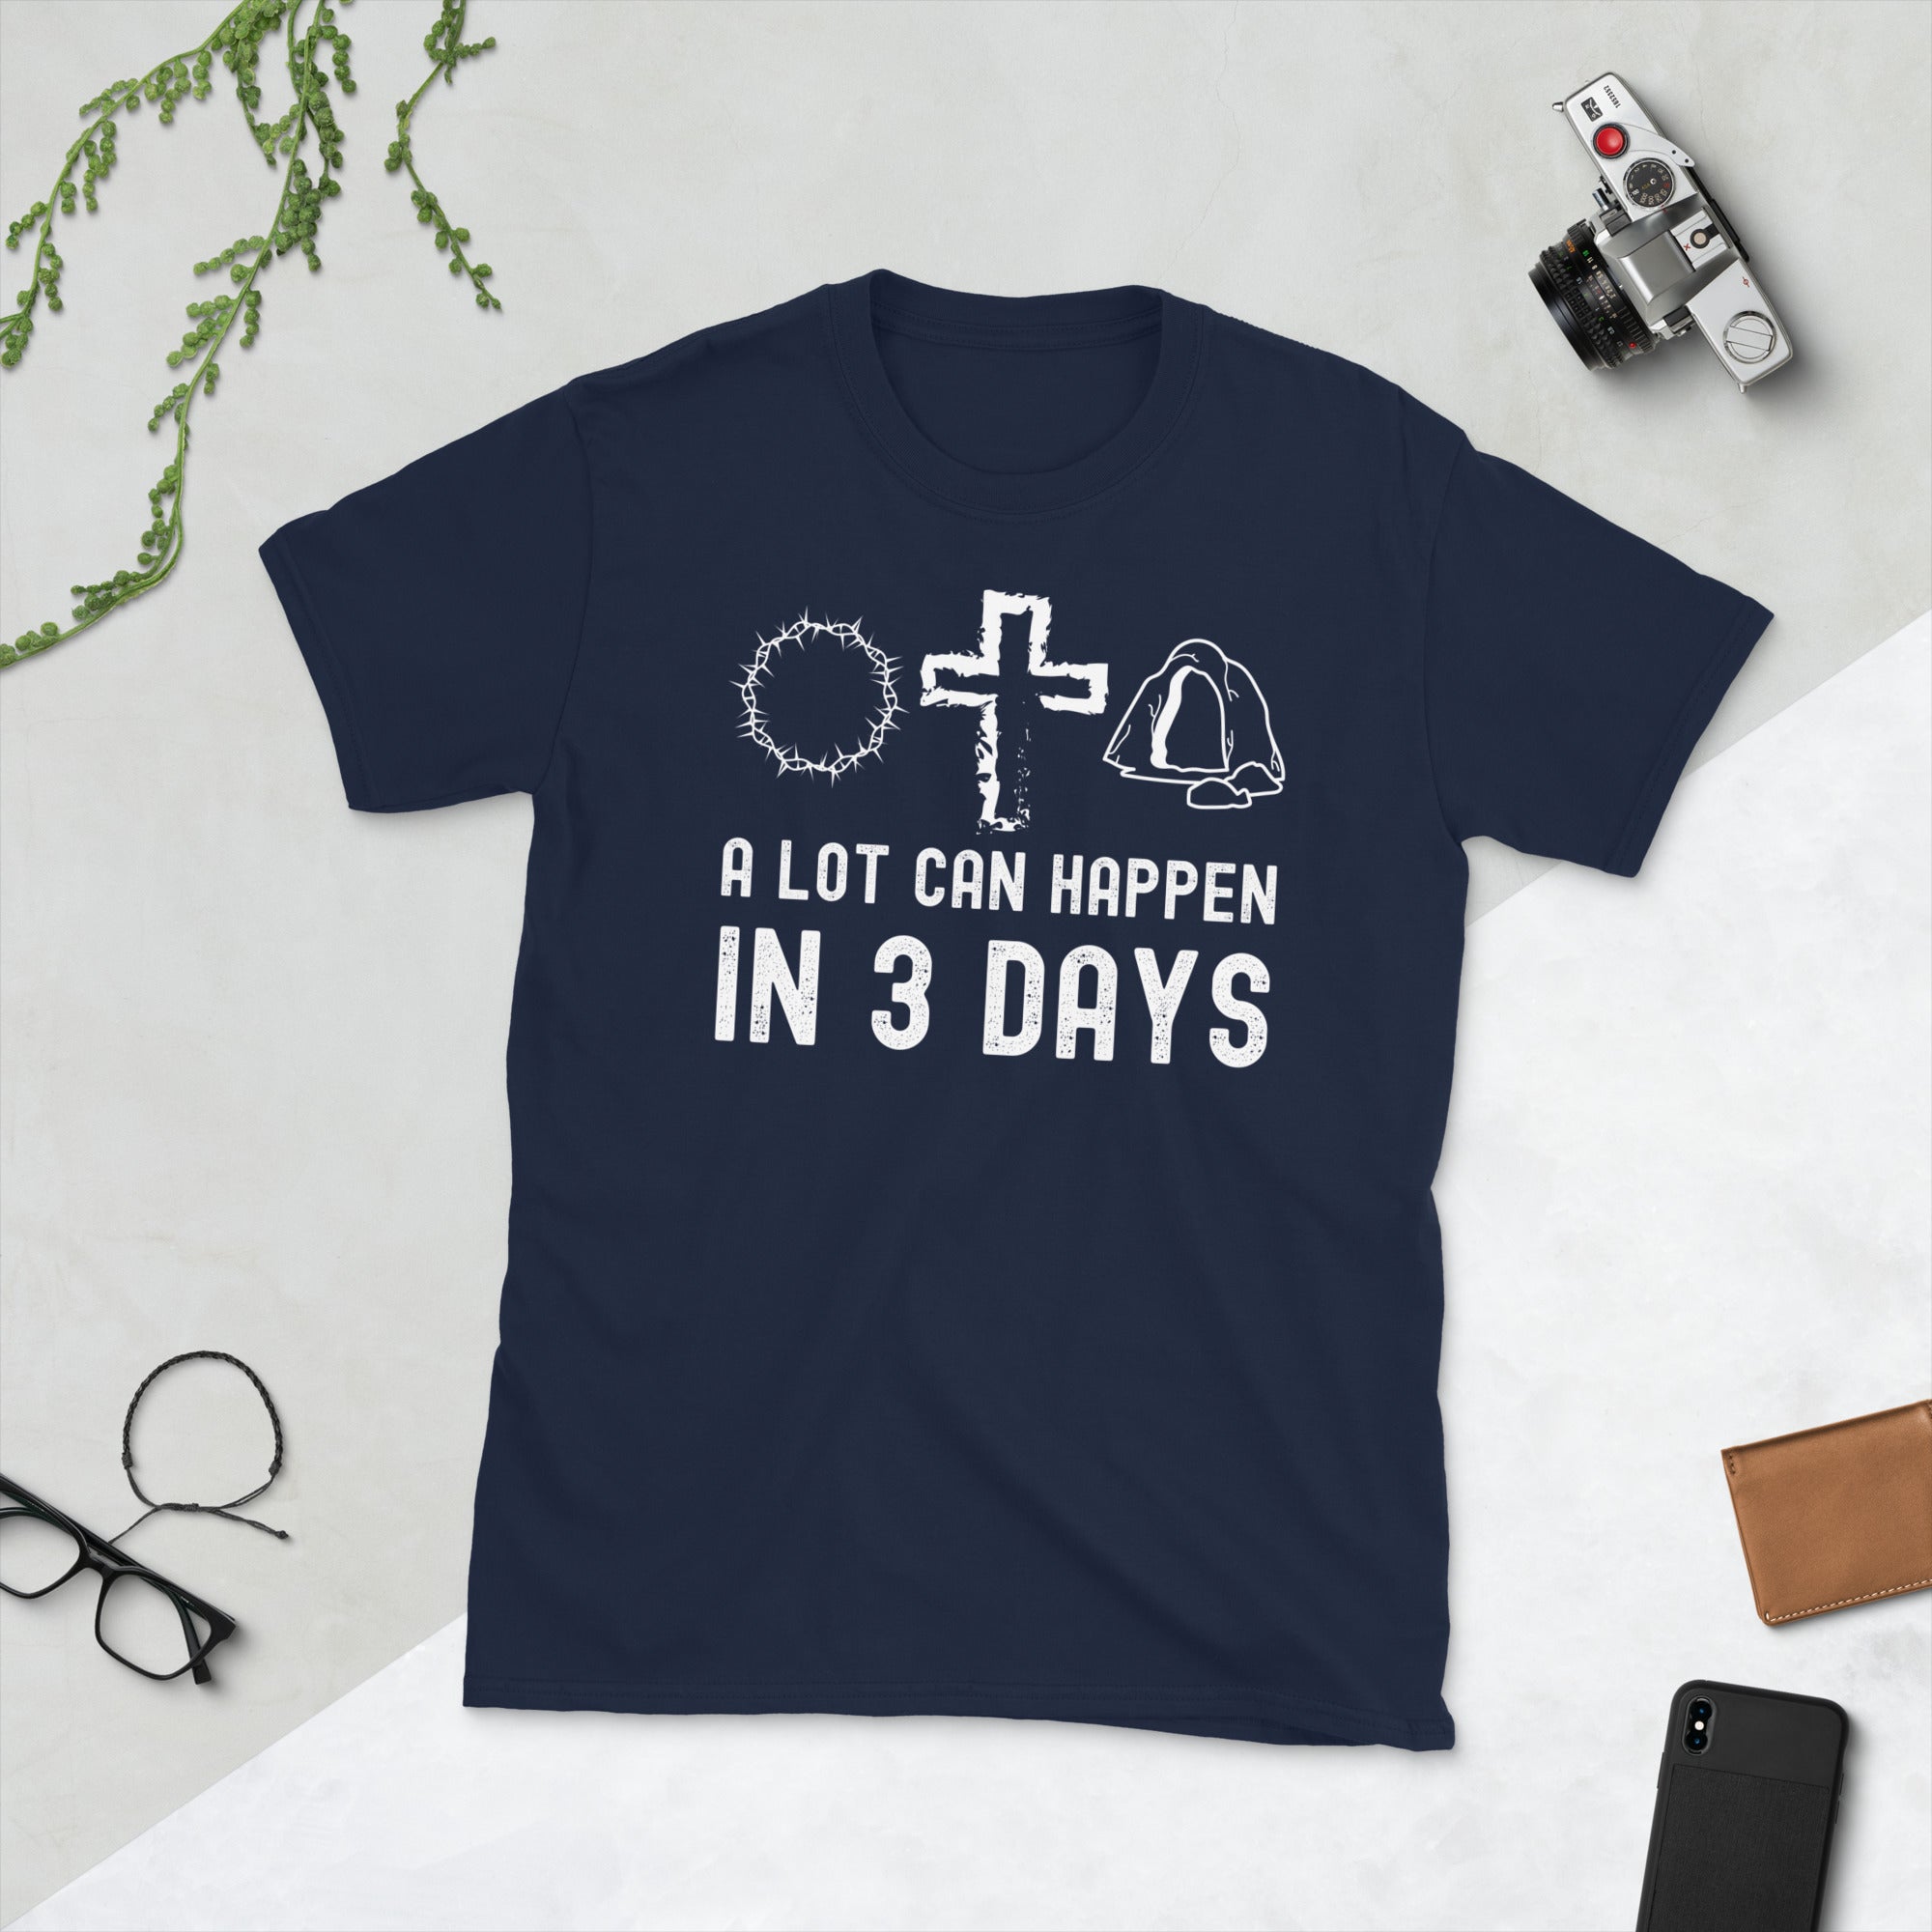 A Lot Can Happen in 3 Days Easter Shirt, Funny Easter Shirt, Jesus Shirt, Funny Easter Gifts, Easter Shirt For Woman, Jesus Easter Tshirt